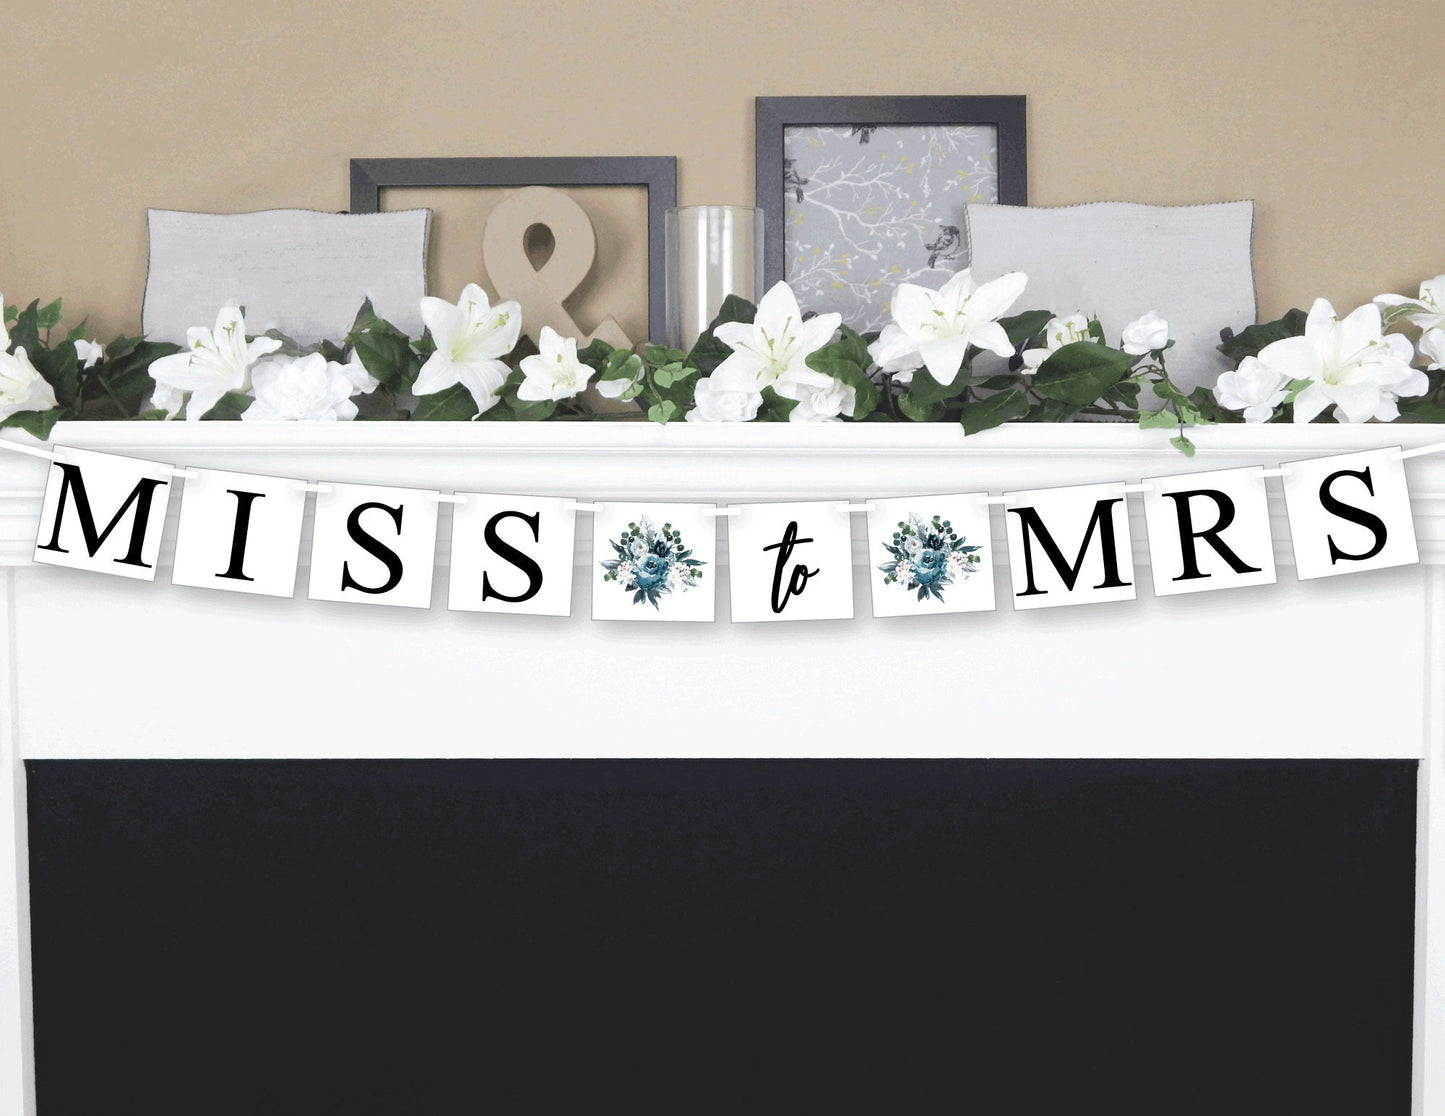 miss to mrs banner, blue watercolor flower bridal shower decorations, bride to be decor, bachelorette party garland, boho future mrs sign